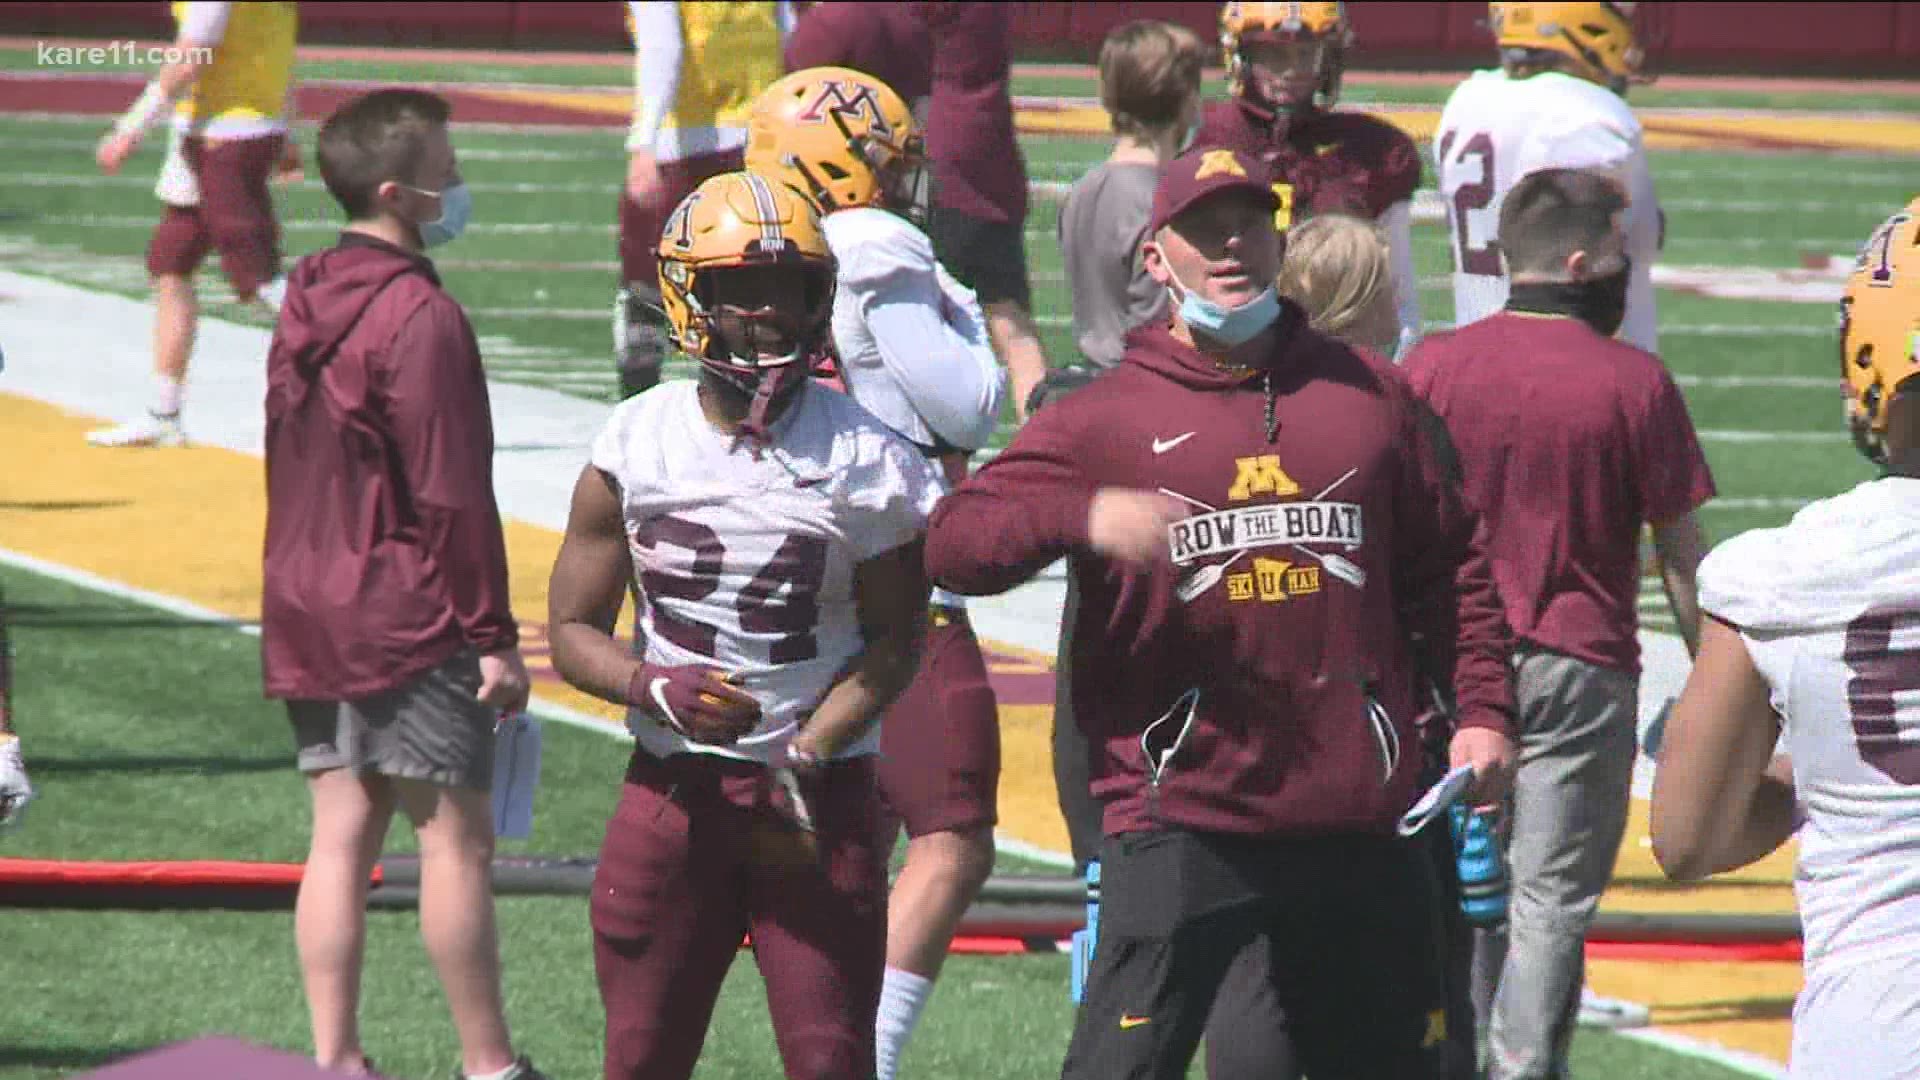 Spring football is a unique challenge for the U of M coaching staff, getting top players reps while ensuring they don't suffer injuries that can last through fall.